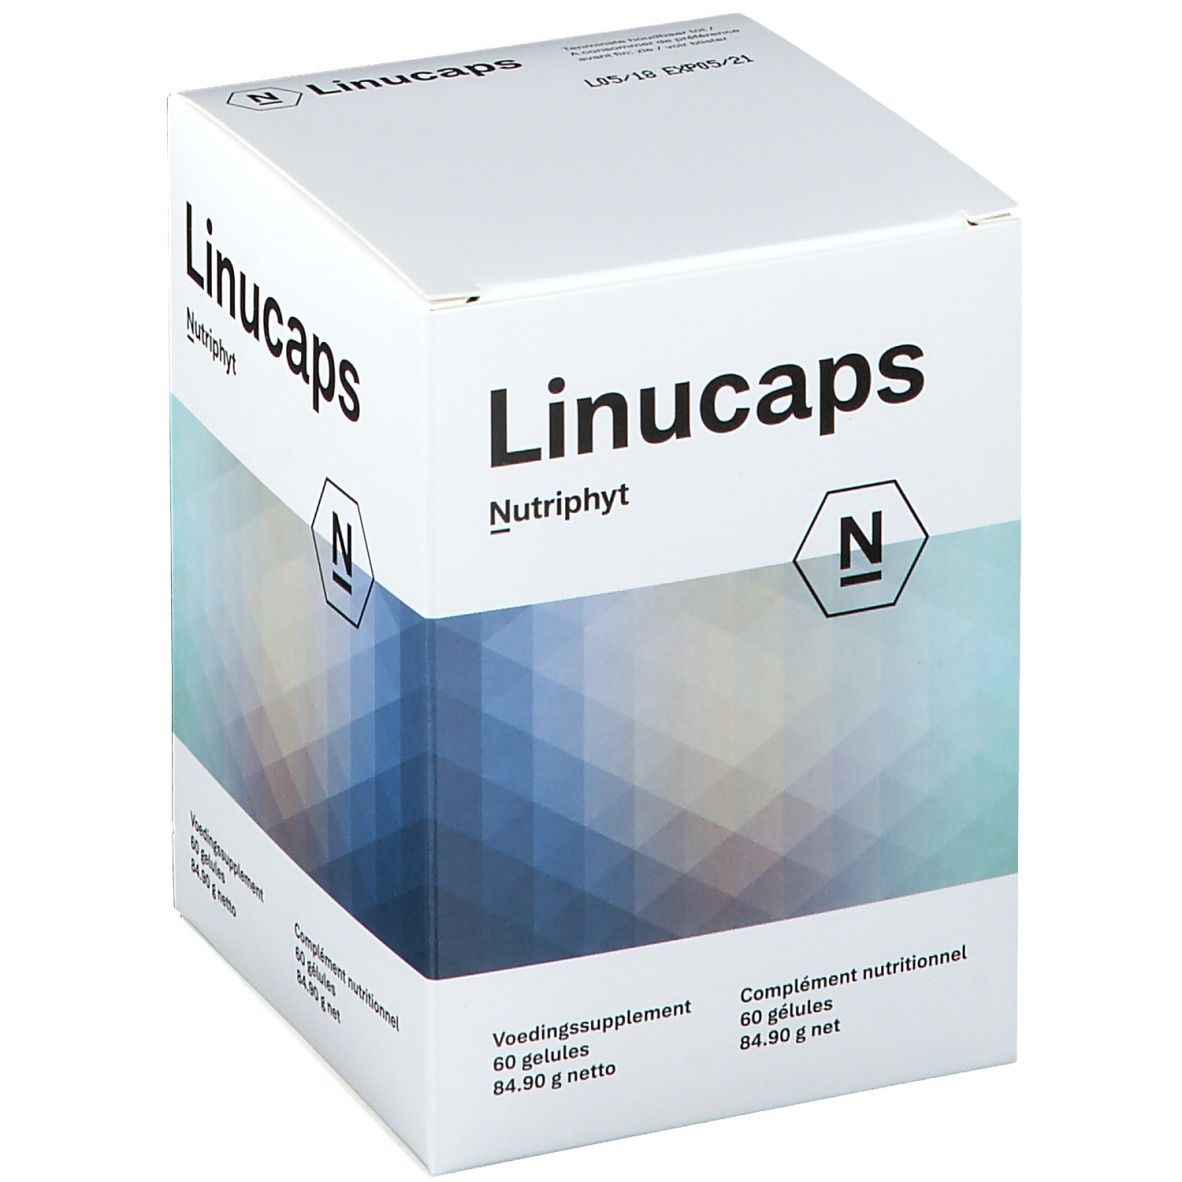 Image of Linucaps Nutriphyt